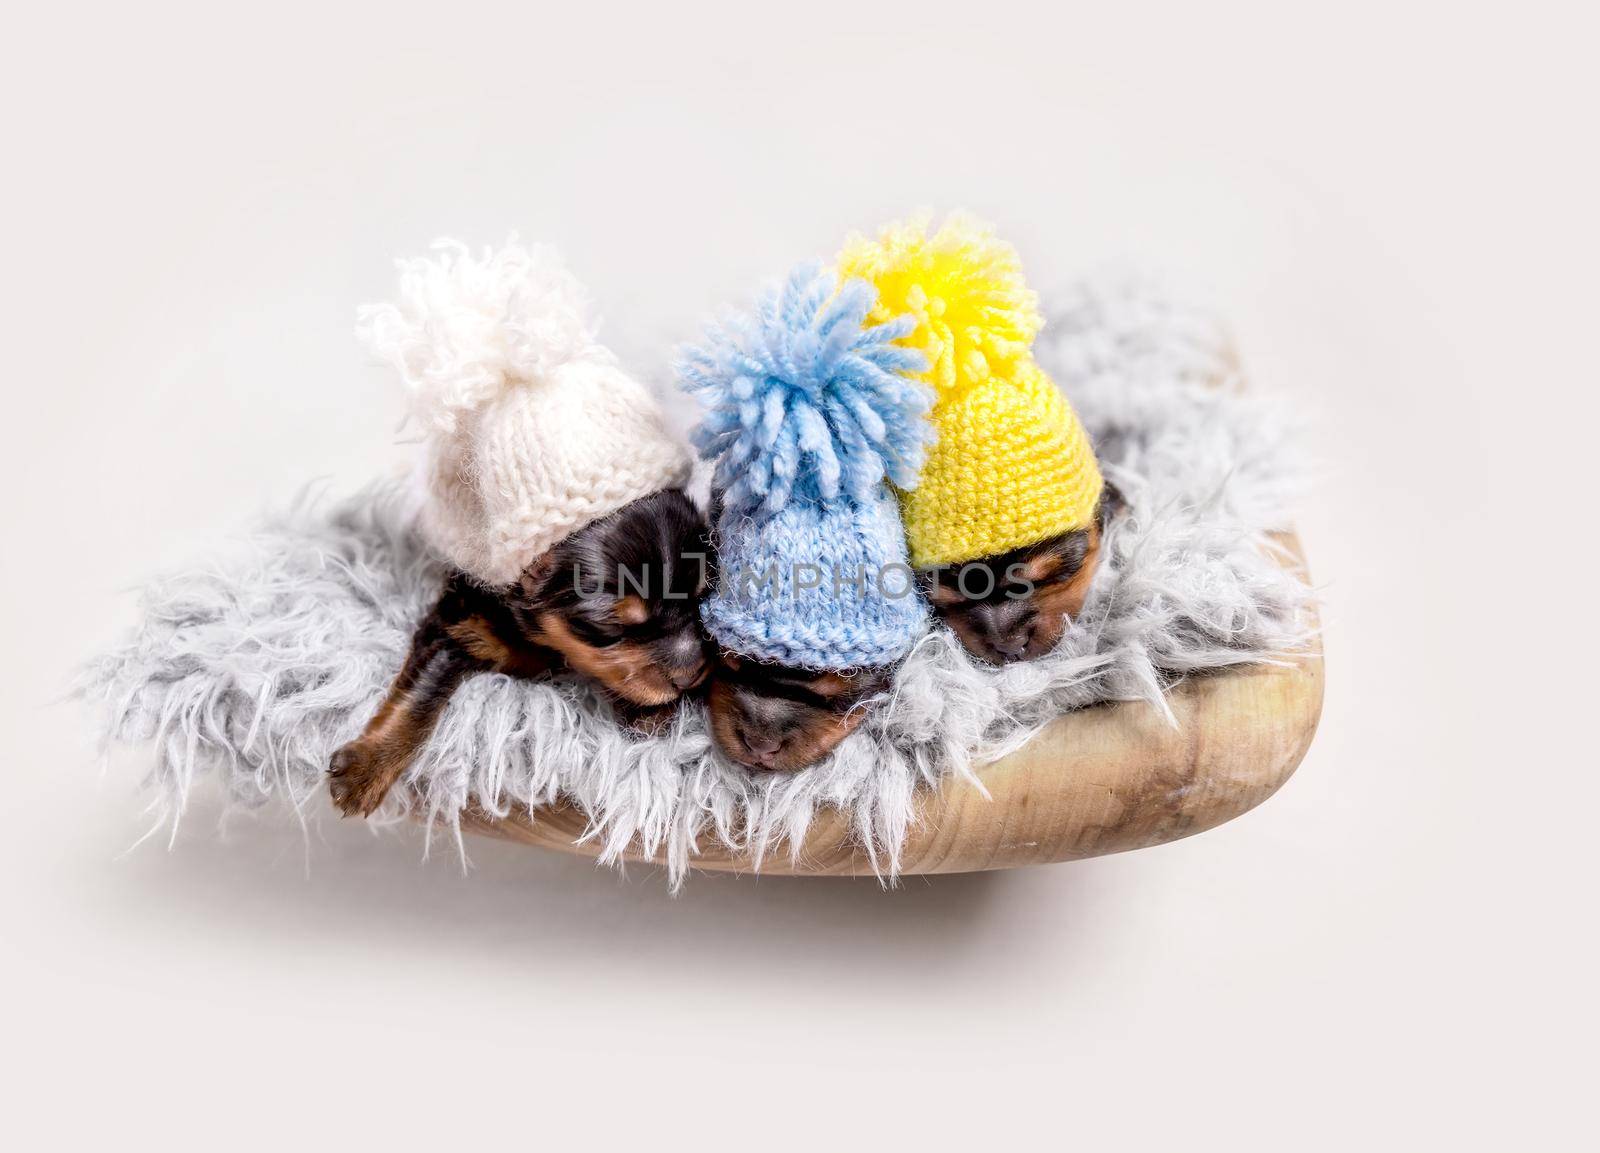 Cute york breed puppies with colorful hats sweetly sleeping on gray blanket